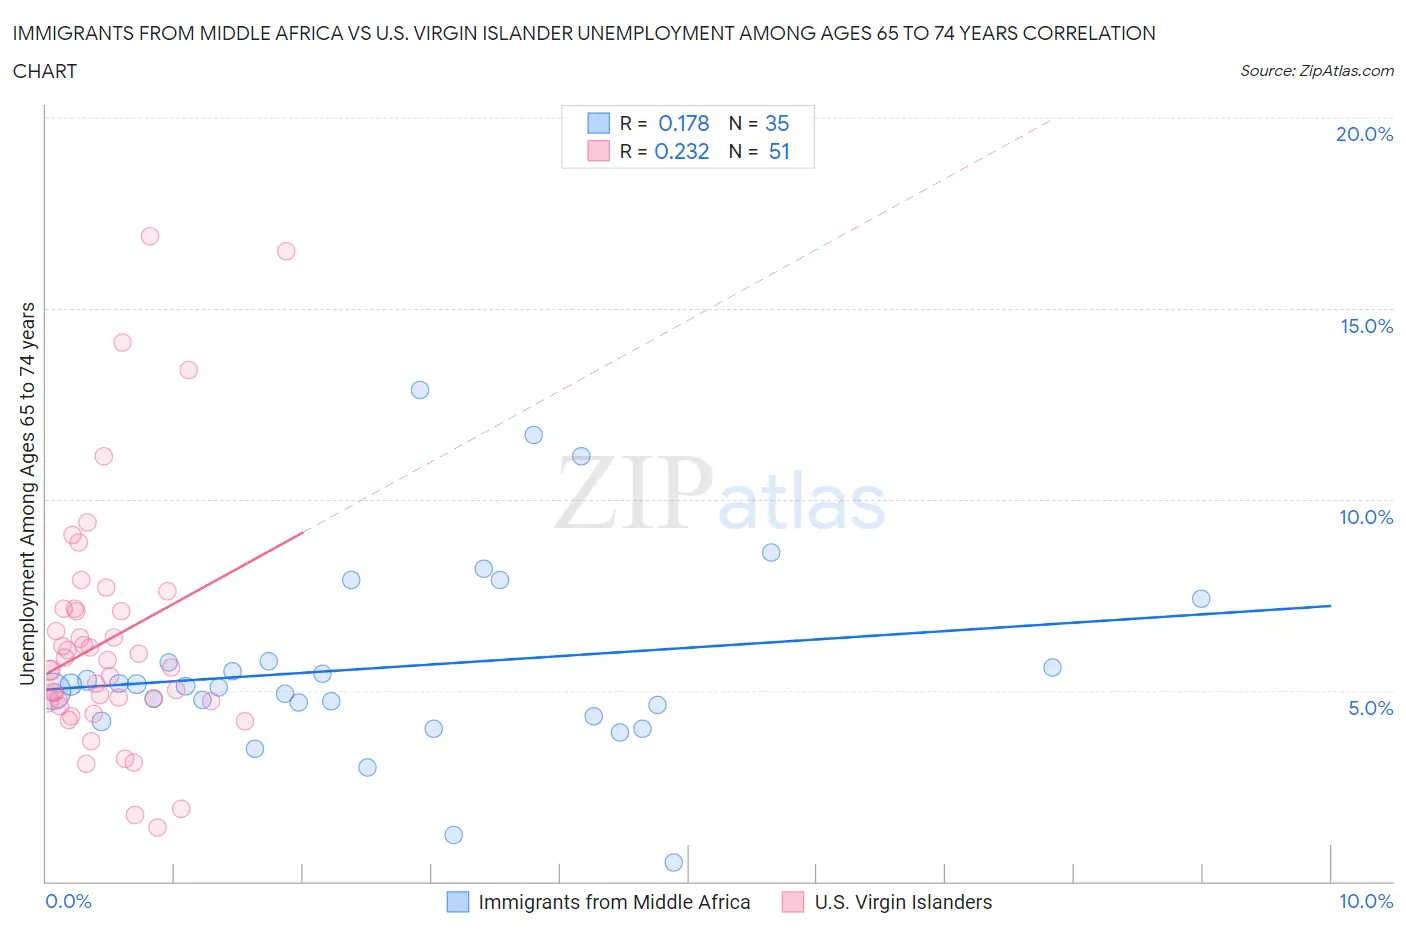 Immigrants from Middle Africa vs U.S. Virgin Islander Unemployment Among Ages 65 to 74 years